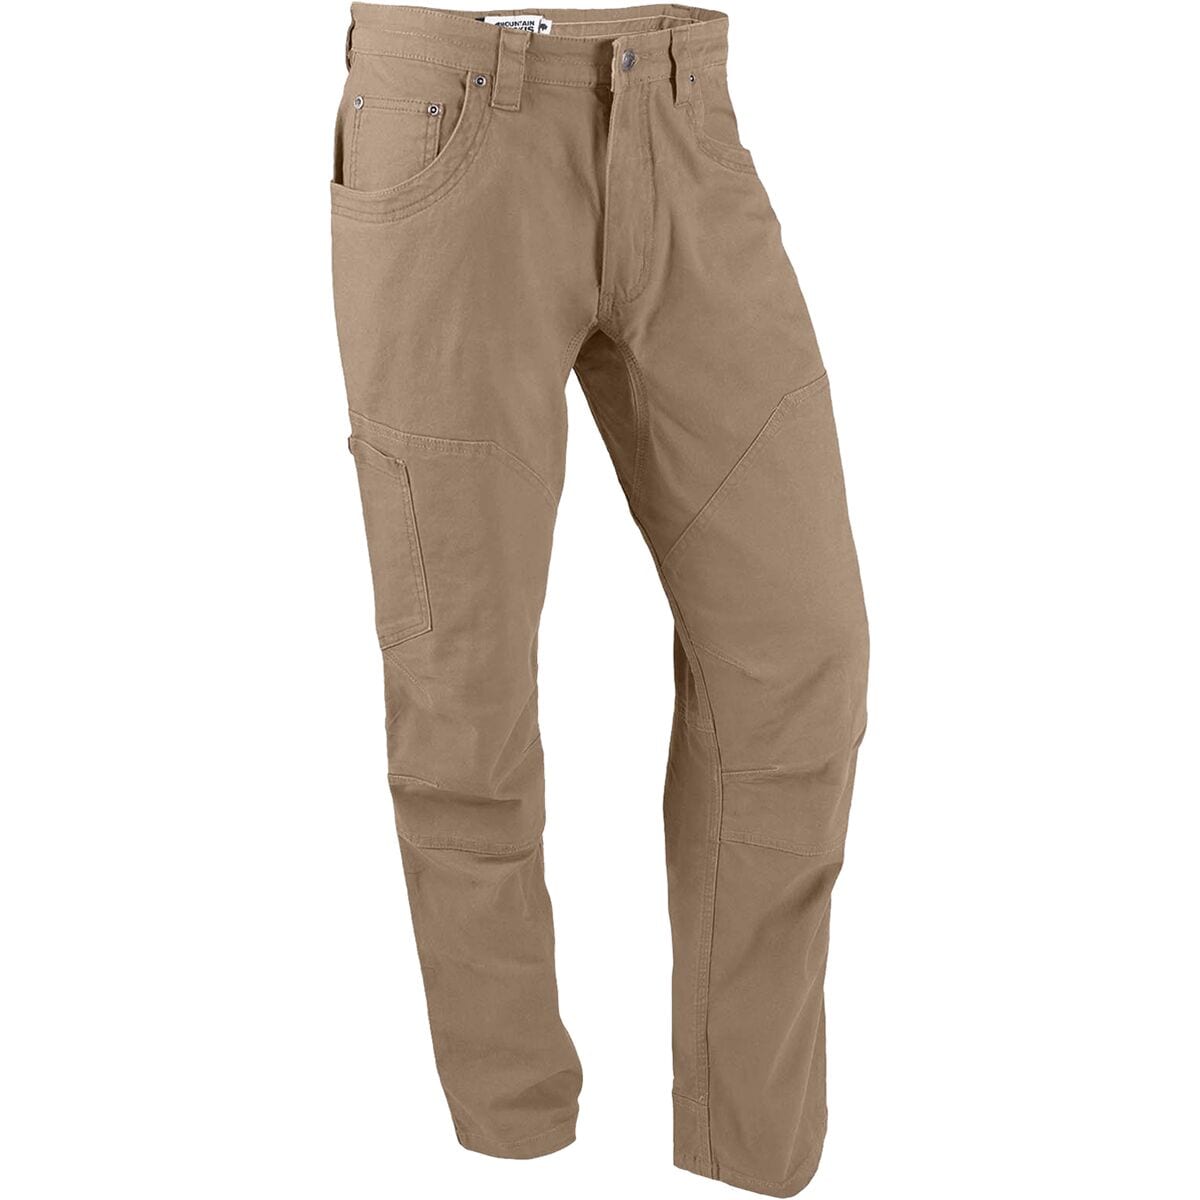 Mountain Khakis Camber 107 Canvas Classic Fit Pant - Men's - Clothing